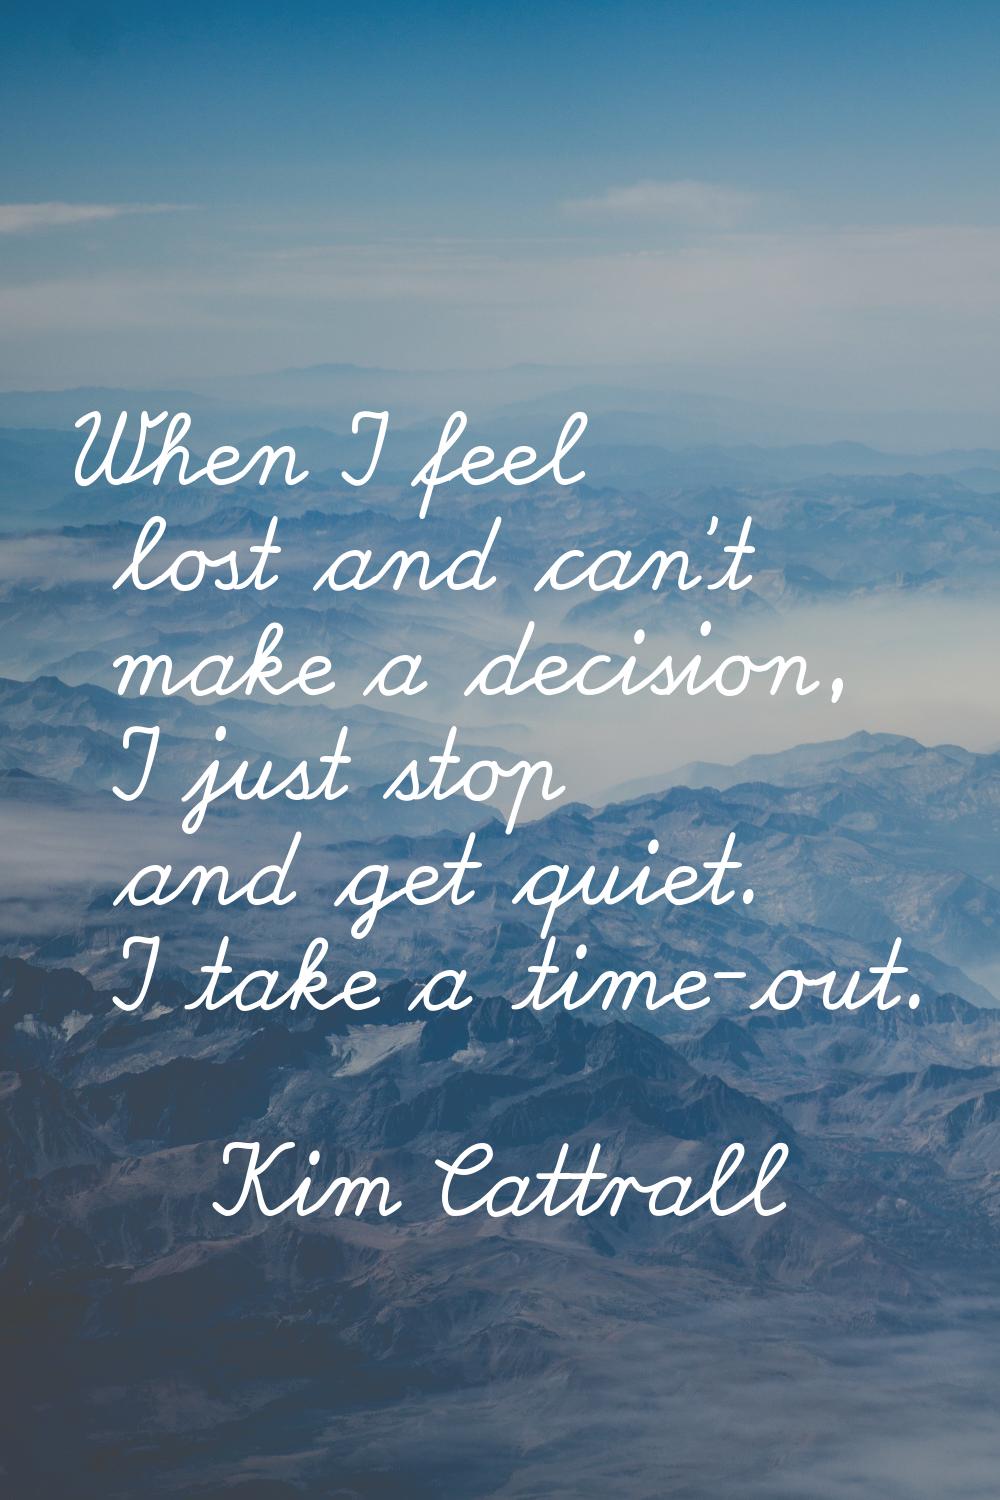 When I feel lost and can't make a decision, I just stop and get quiet. I take a time-out.